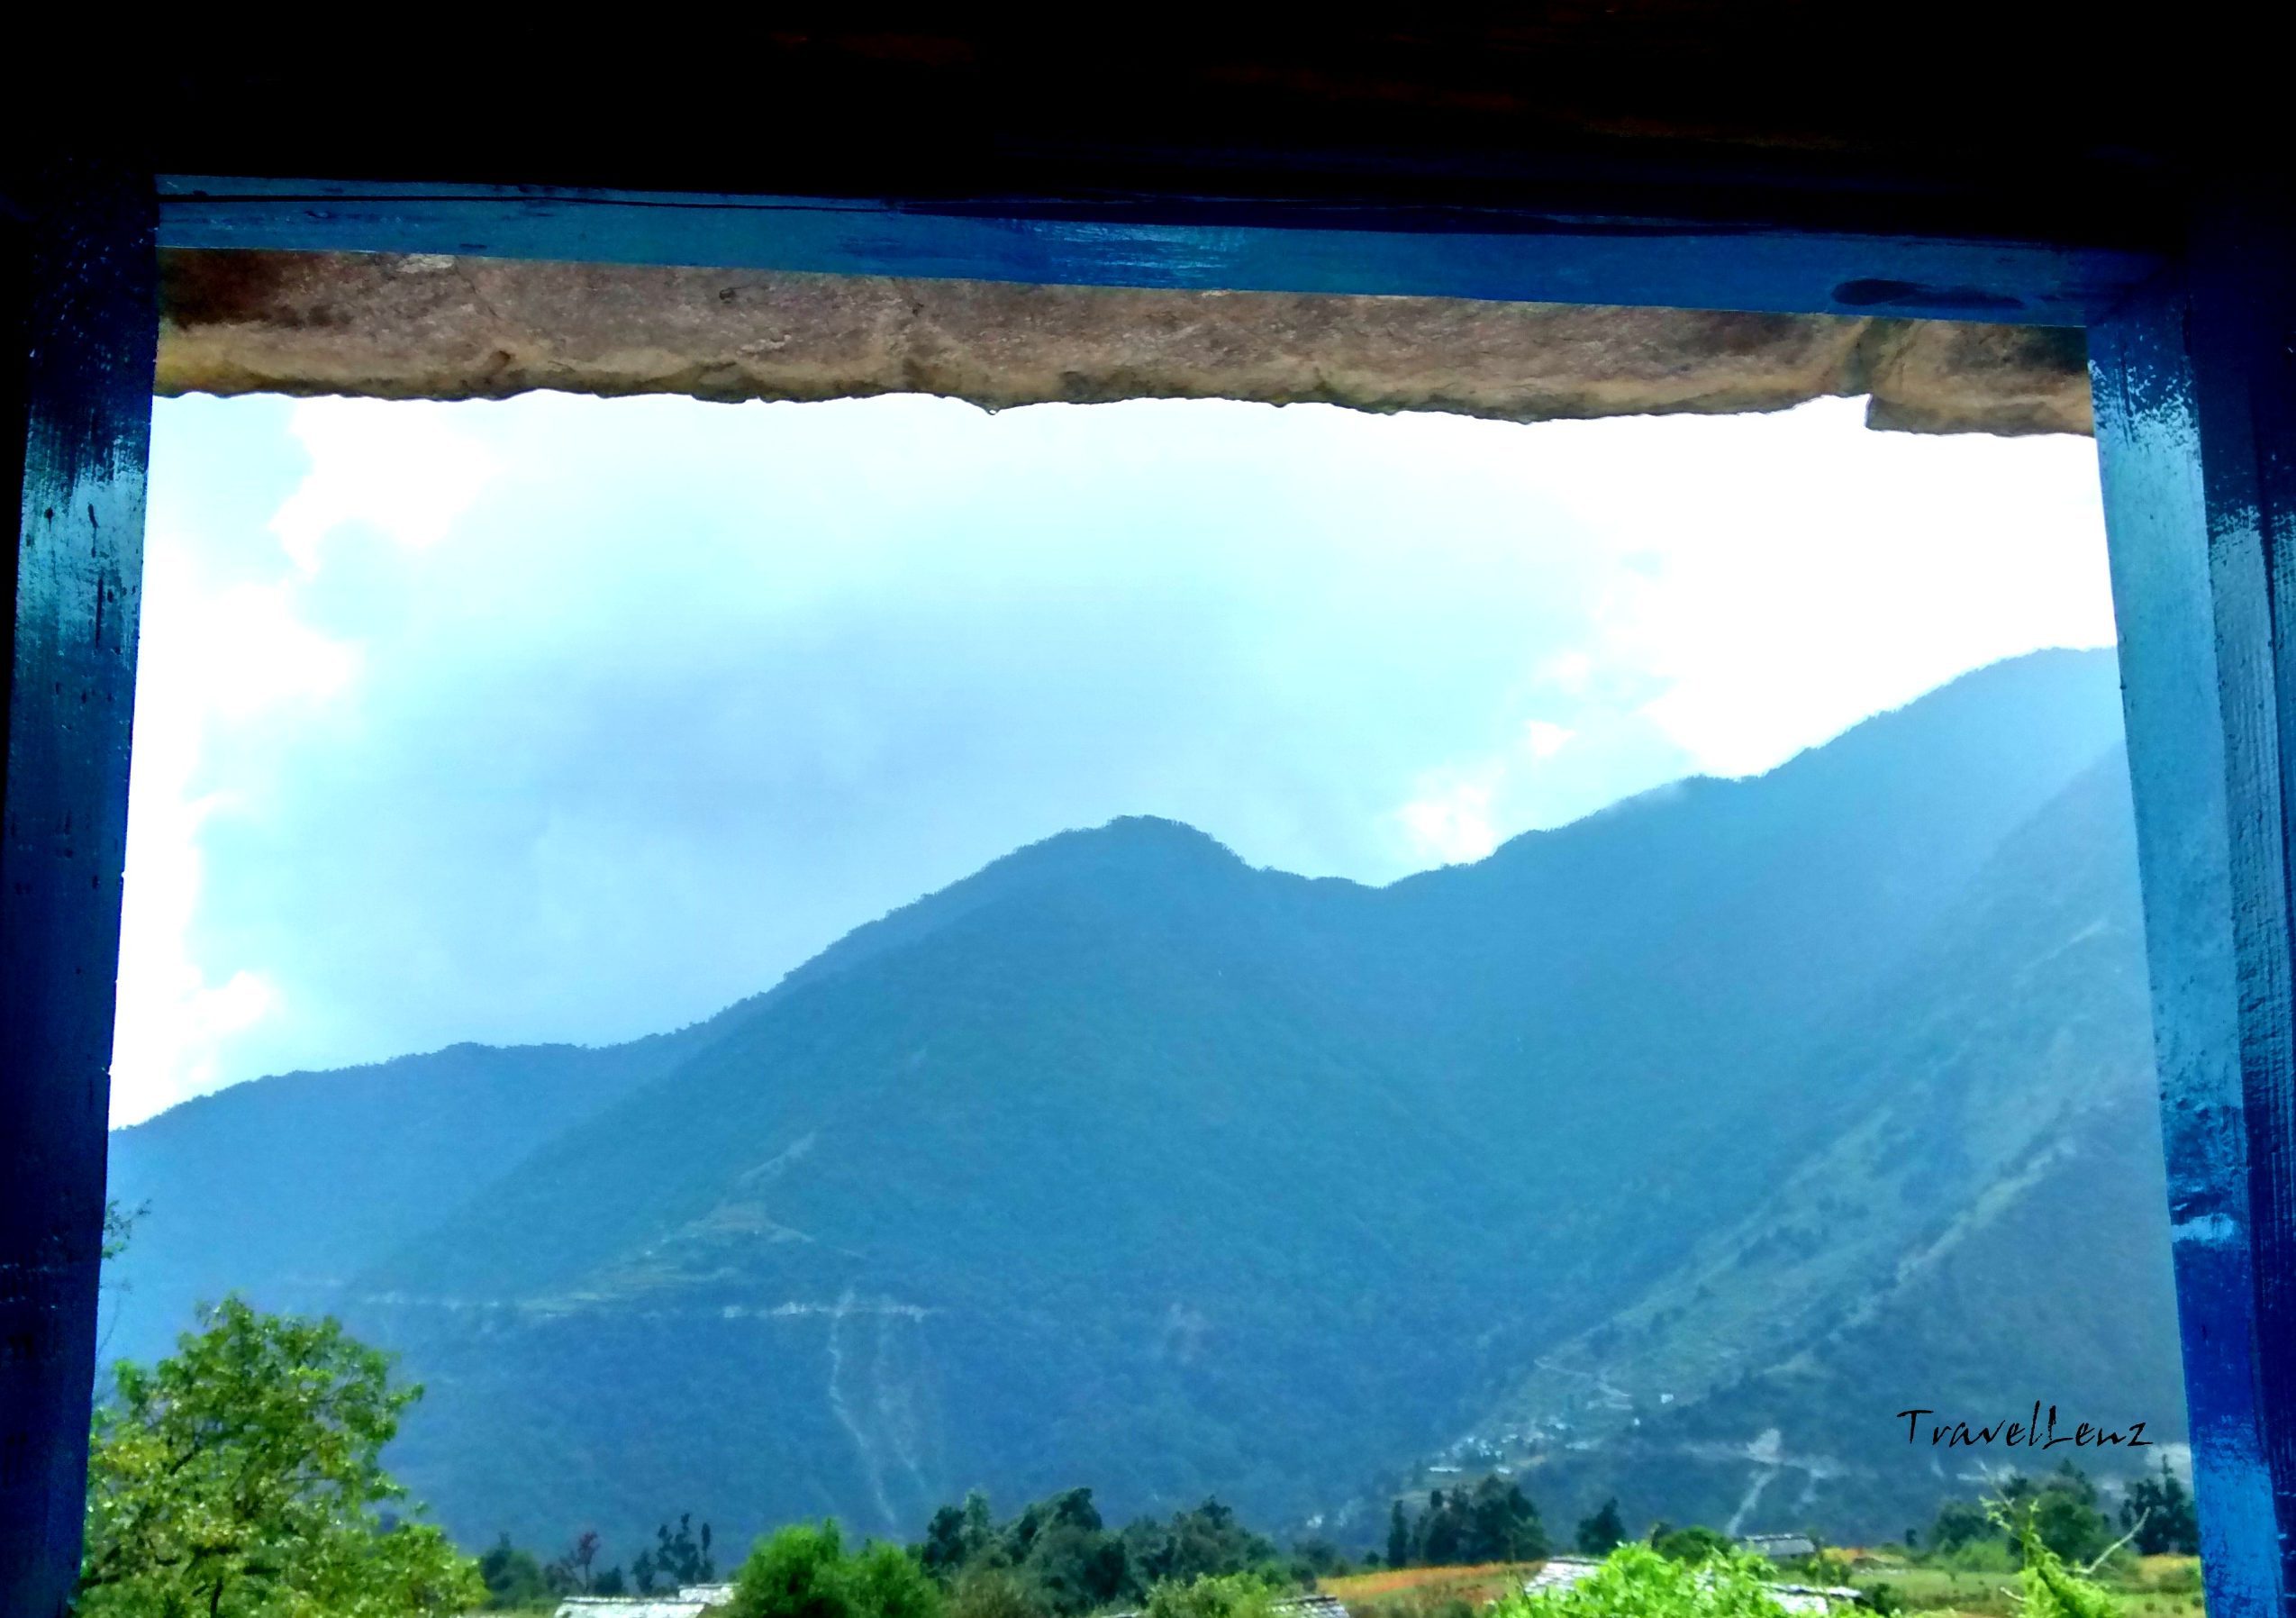 View of the green mountains through a window